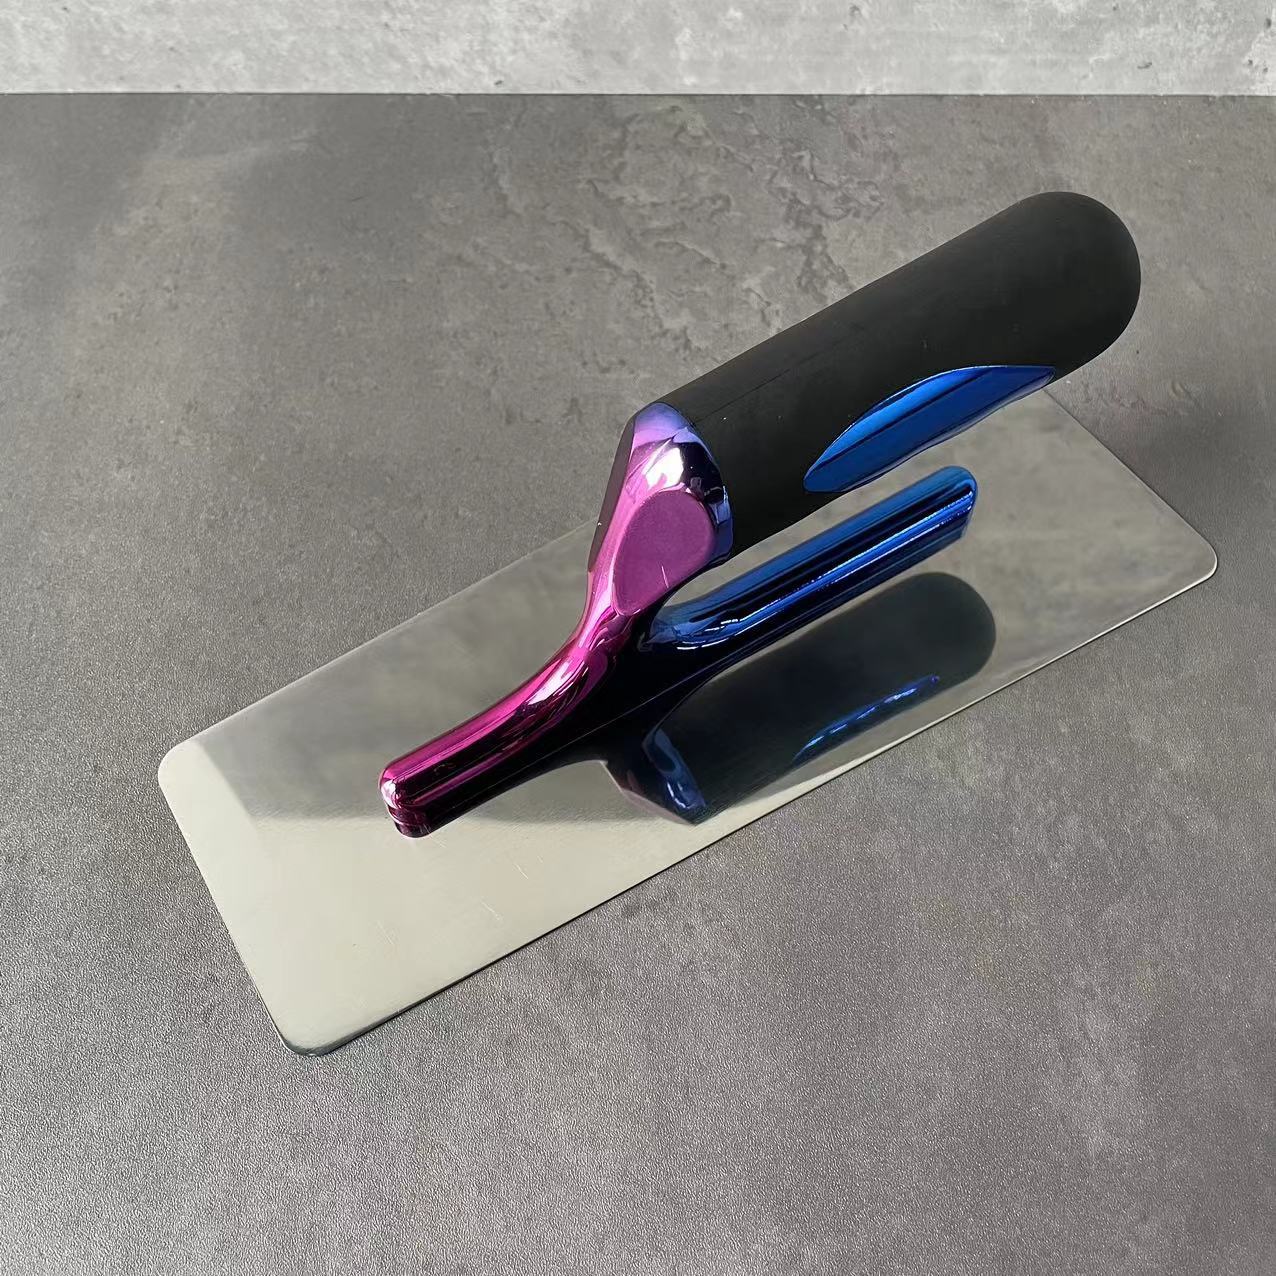 https://www.elehand.com/stainless-steel-trowel-tool-with-rubber-handle-product/